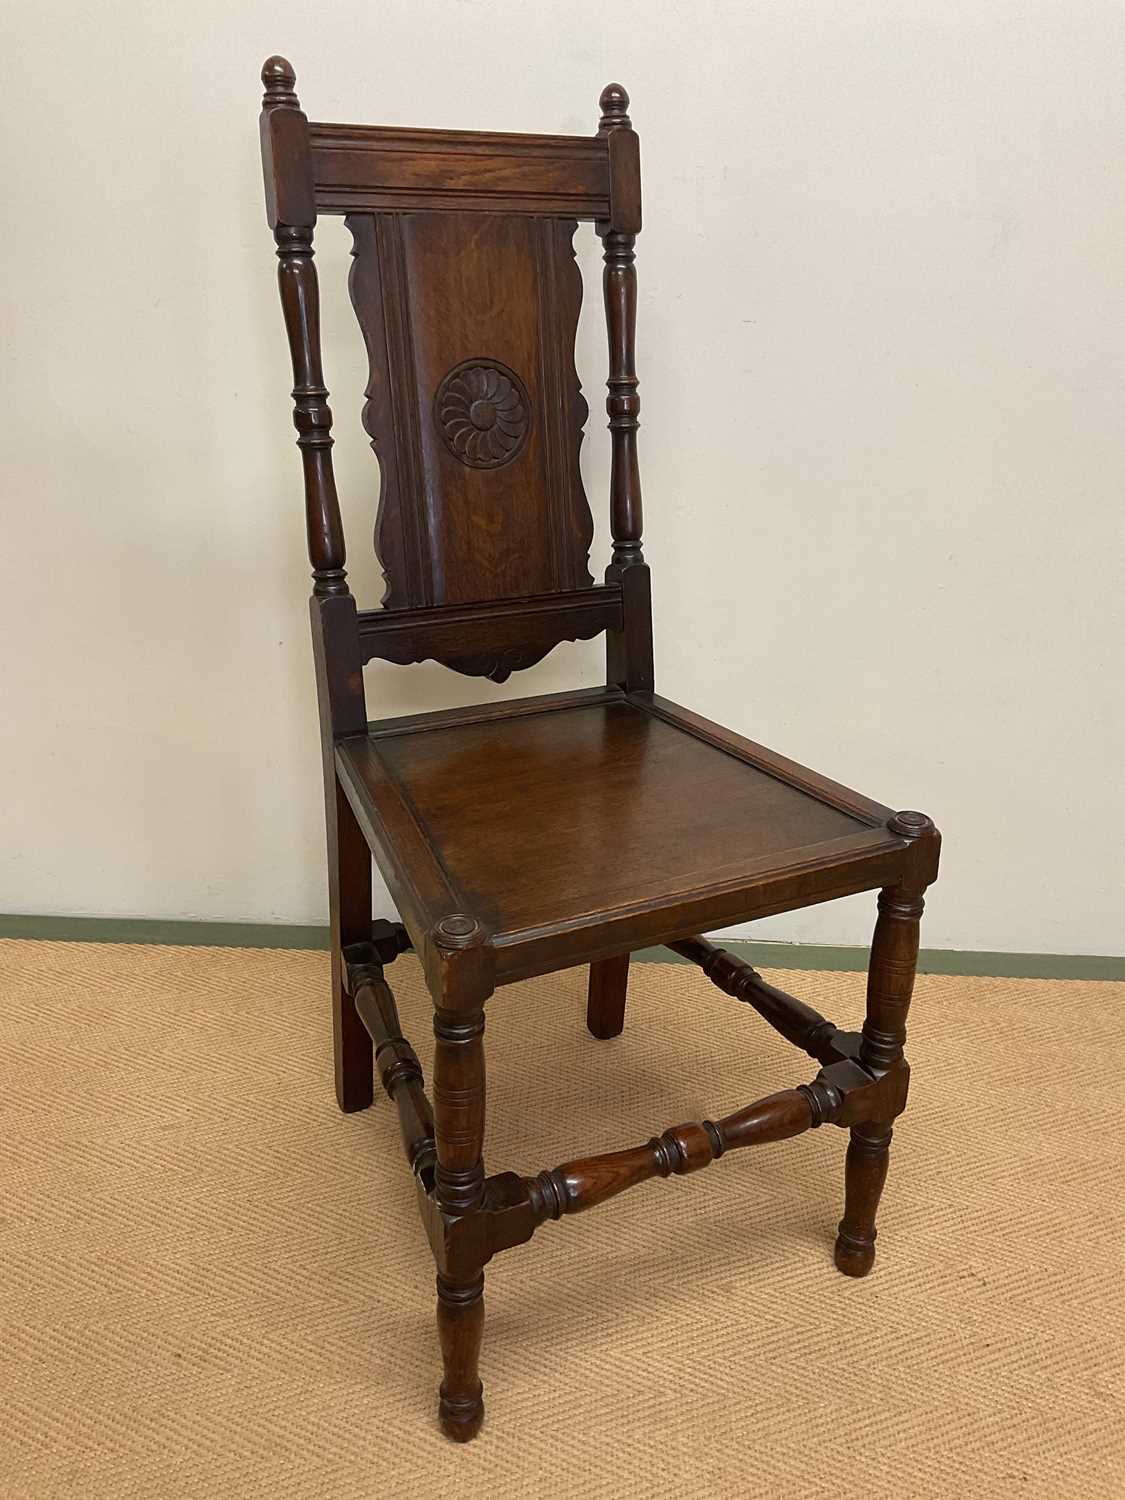 A 19th century oak panel back side chair with panel seat and carved central motif of a flower on the